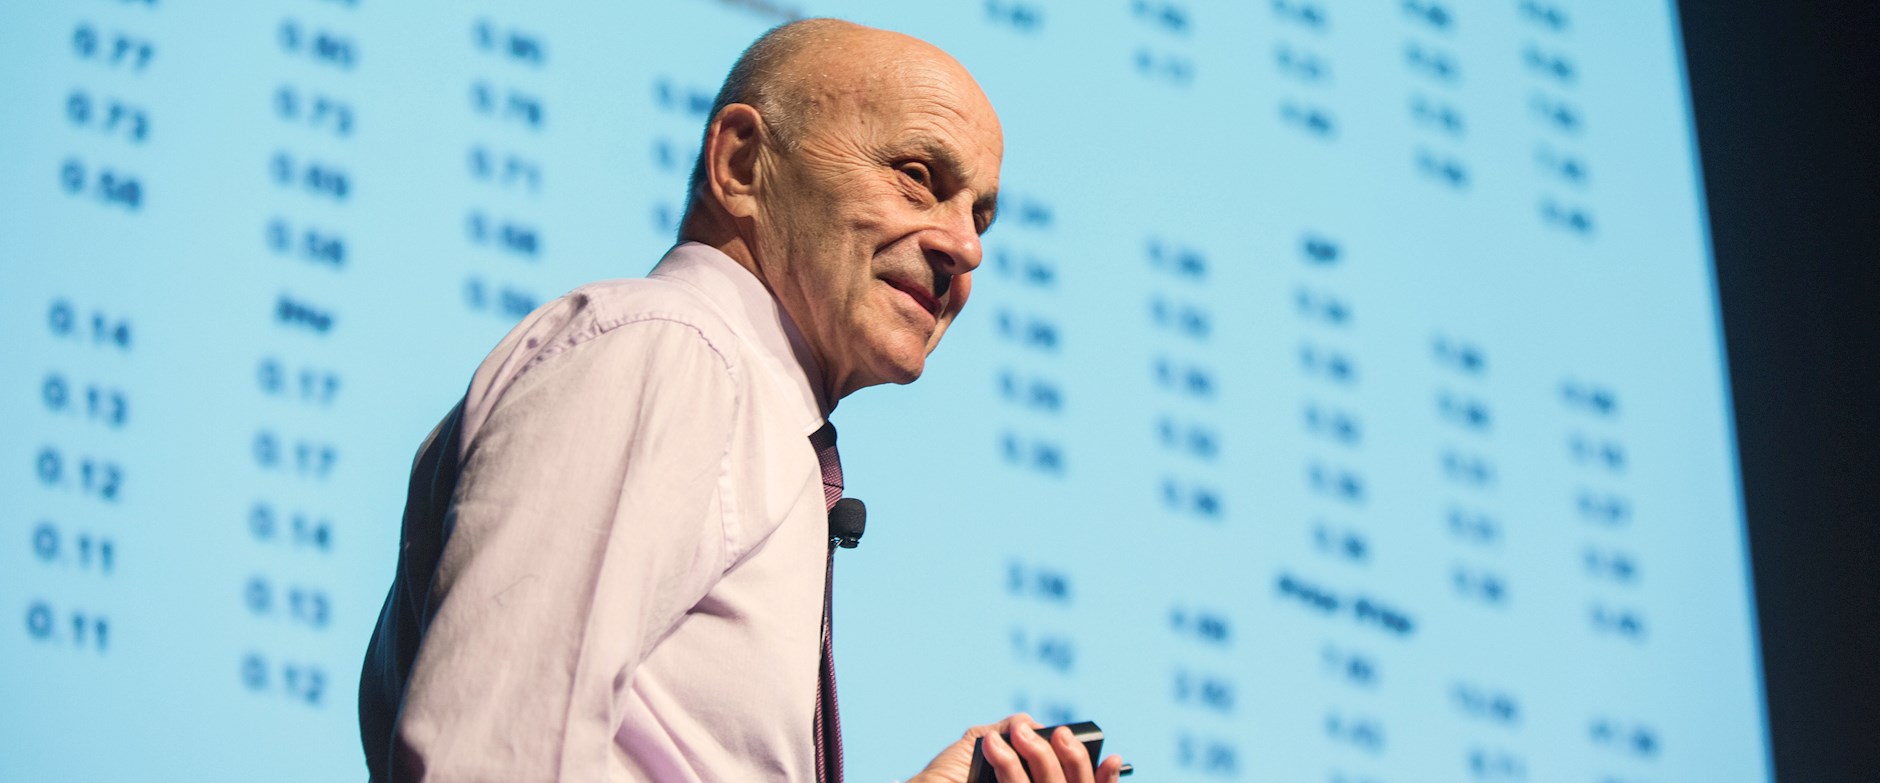 Eugene Fama presenting in front of a projector screen full on numbers